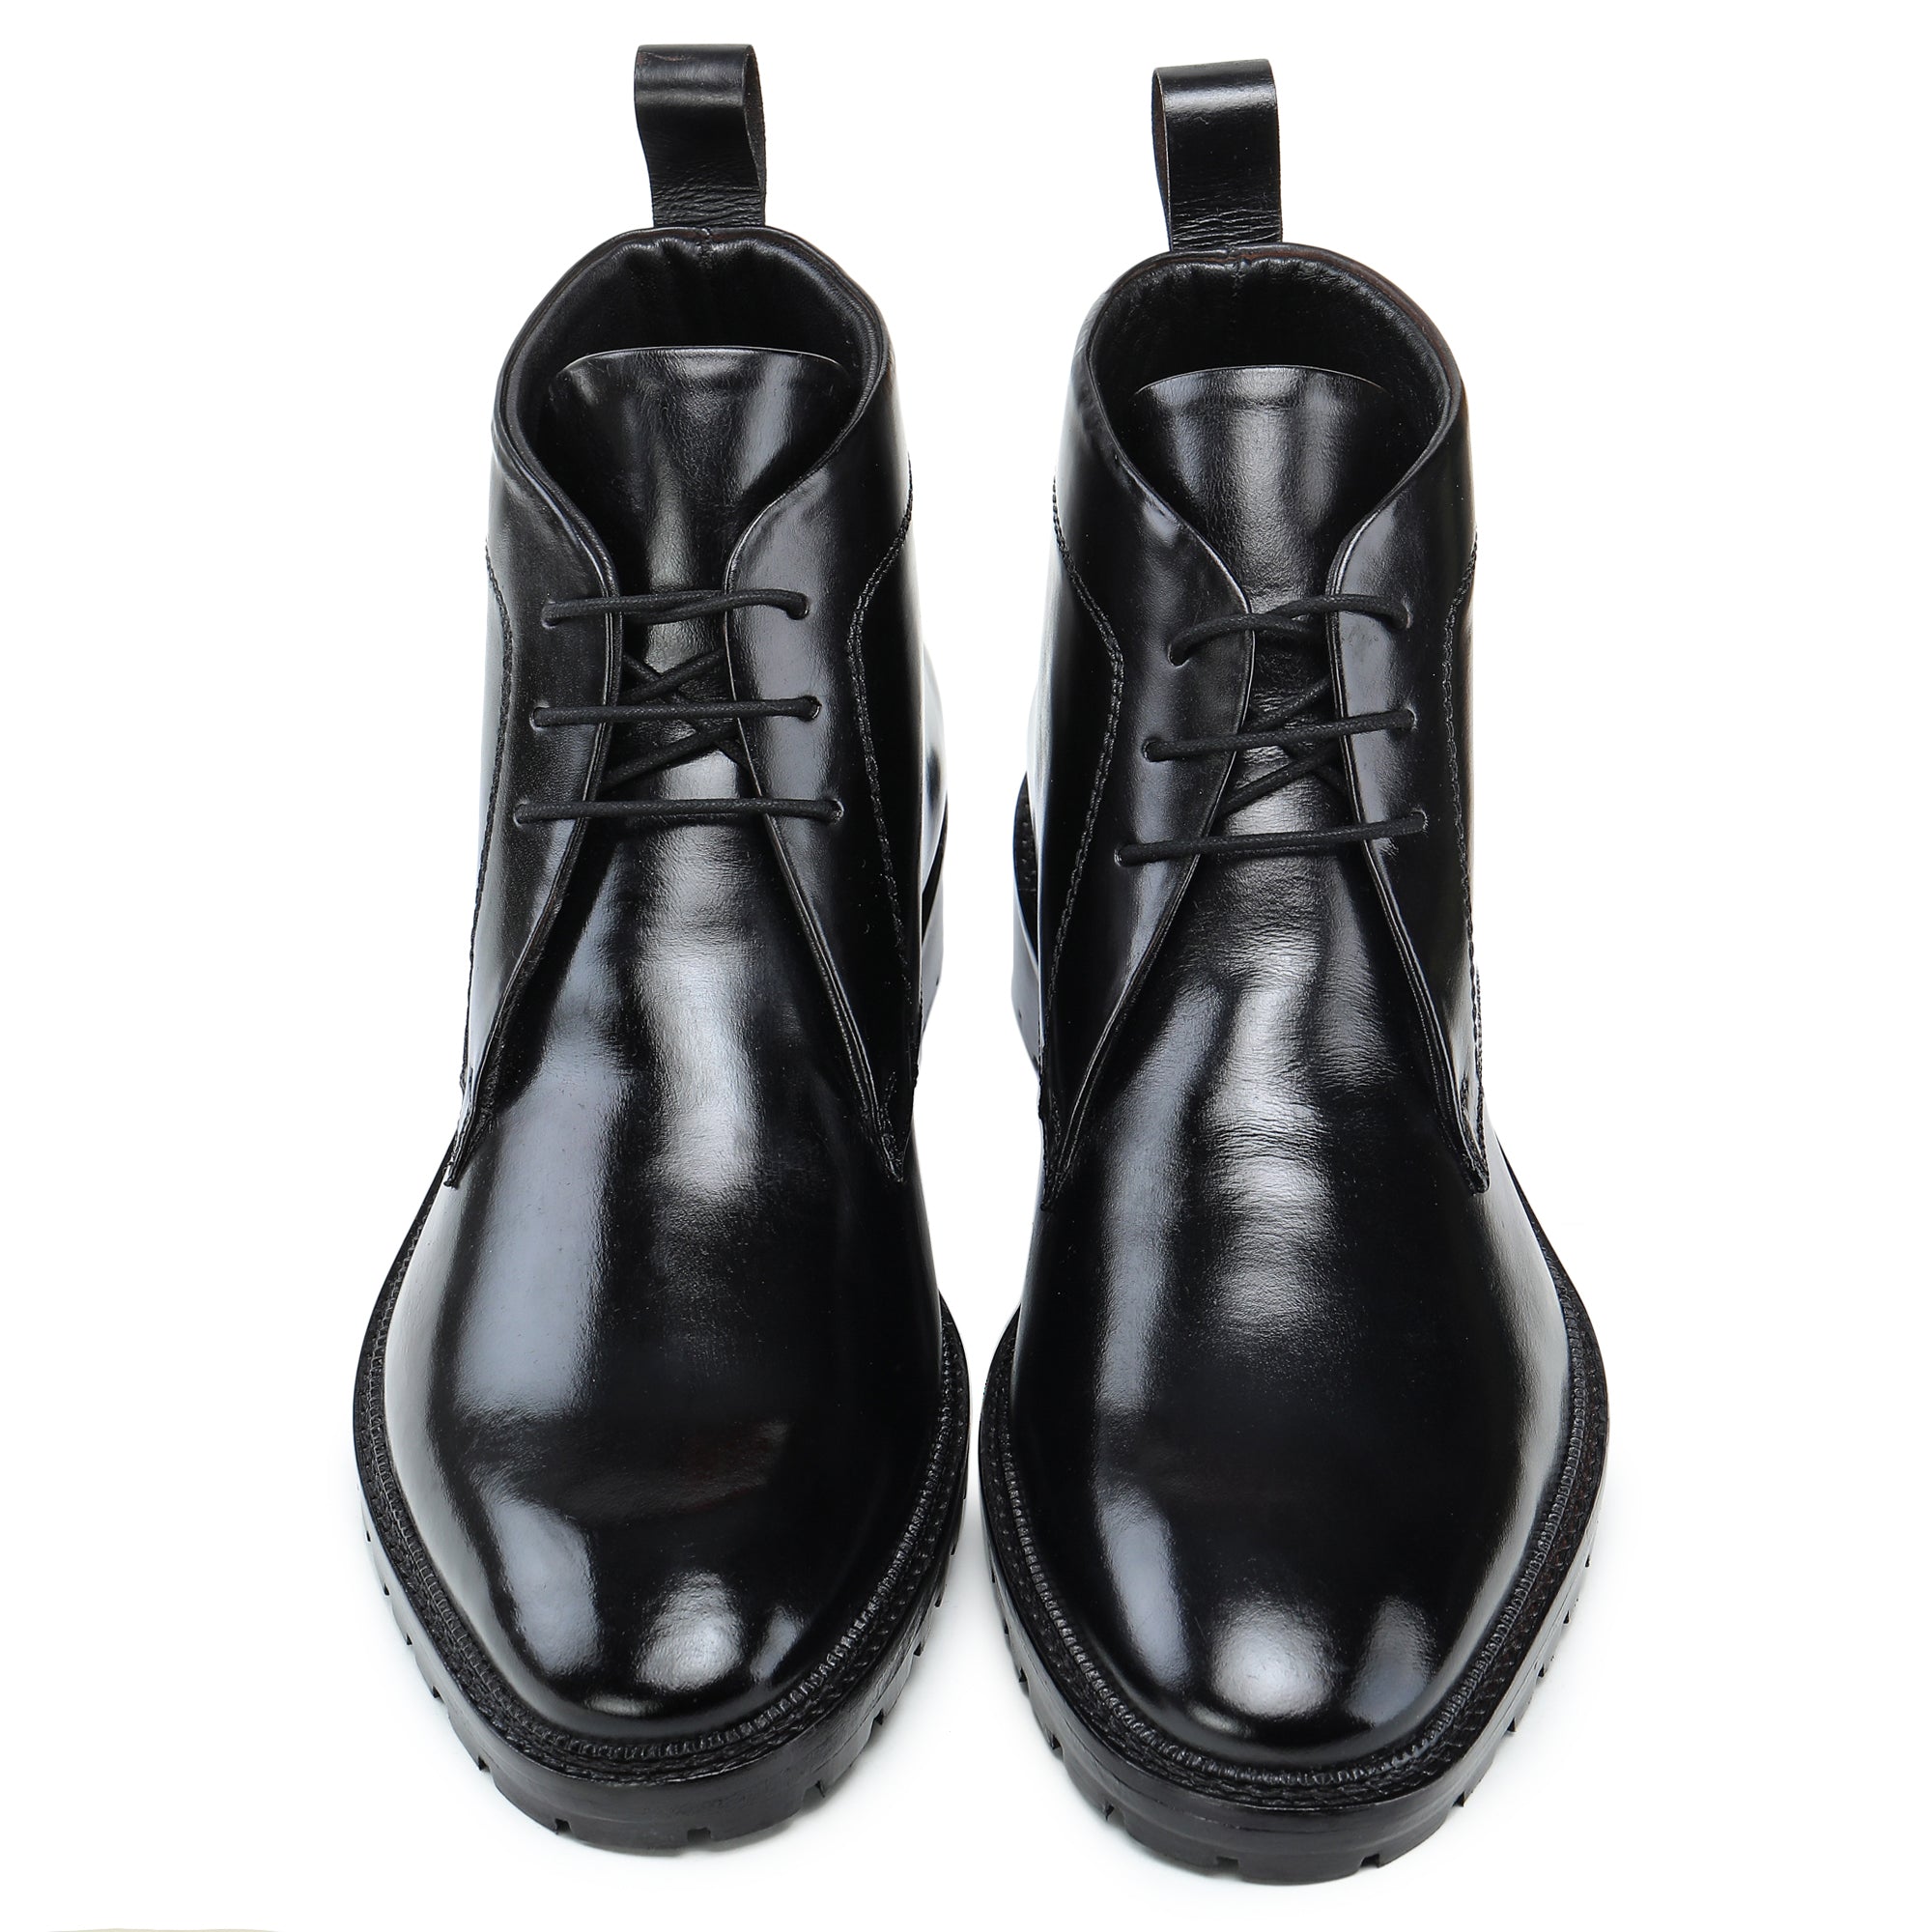 Classic Chukka Boots- Black by Lethato